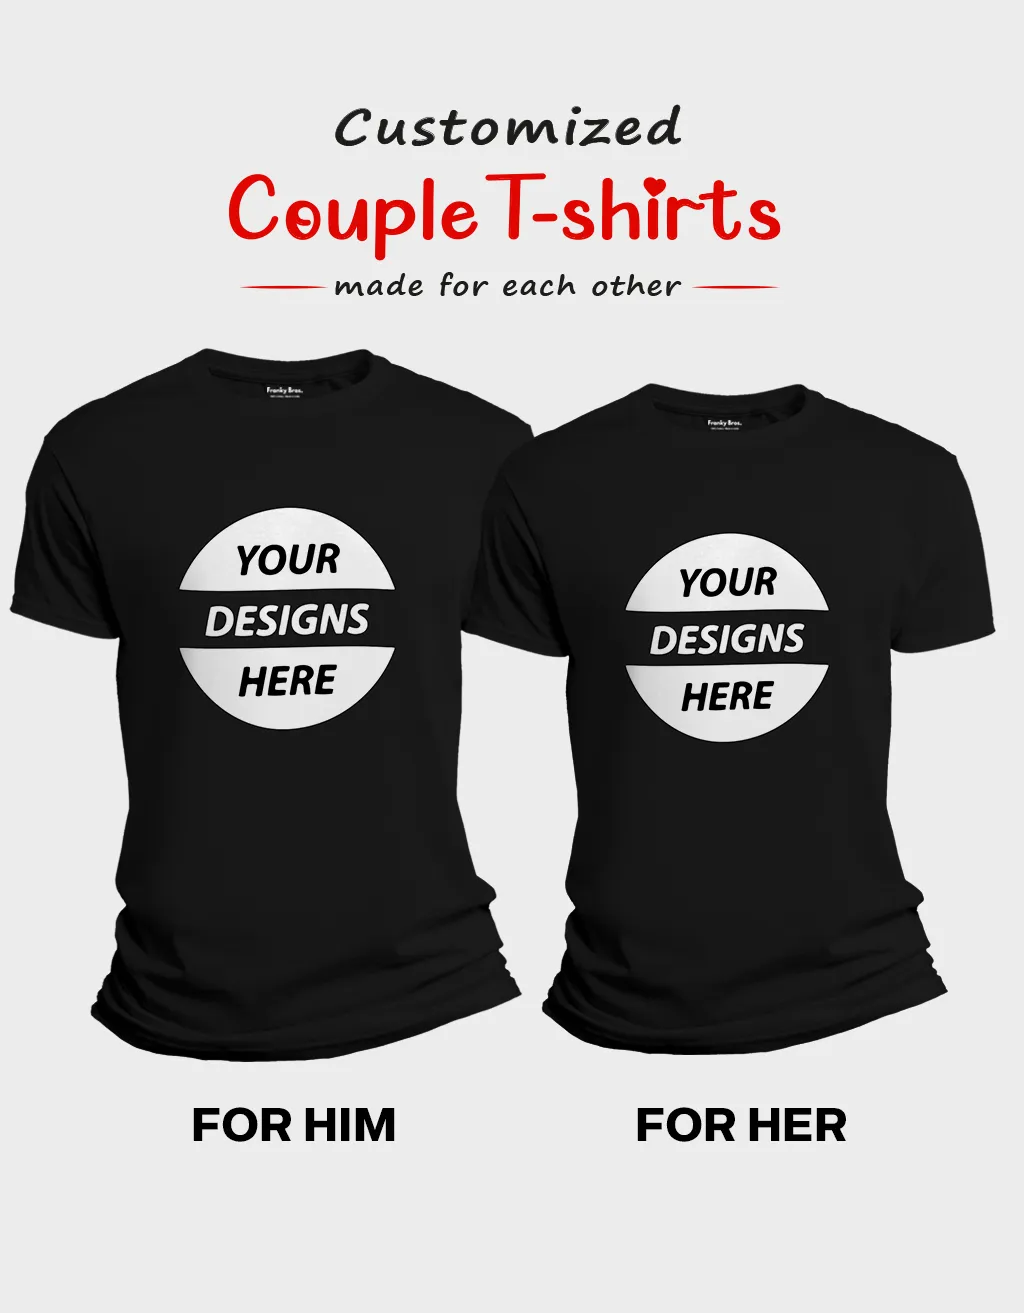 Send personalised gifts for couples in India. Gifts to India.